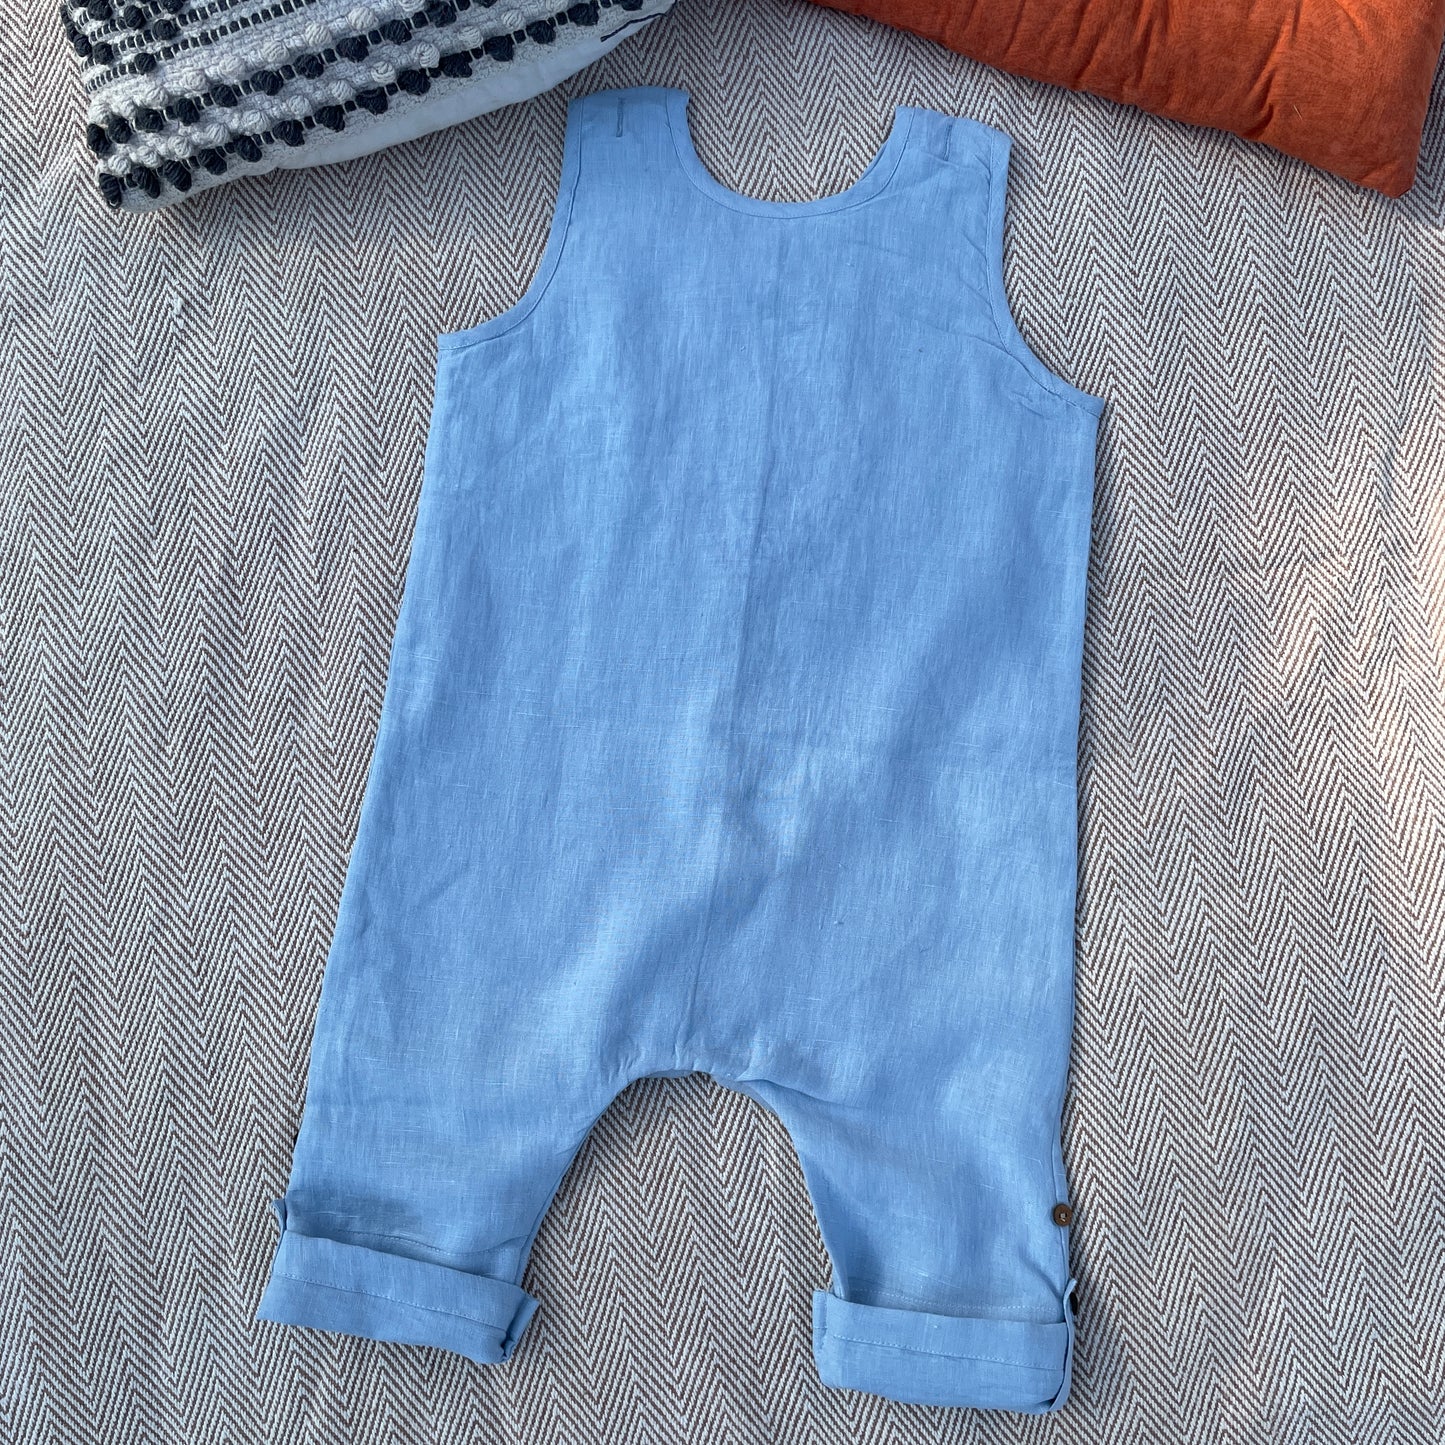 A day at the park romper